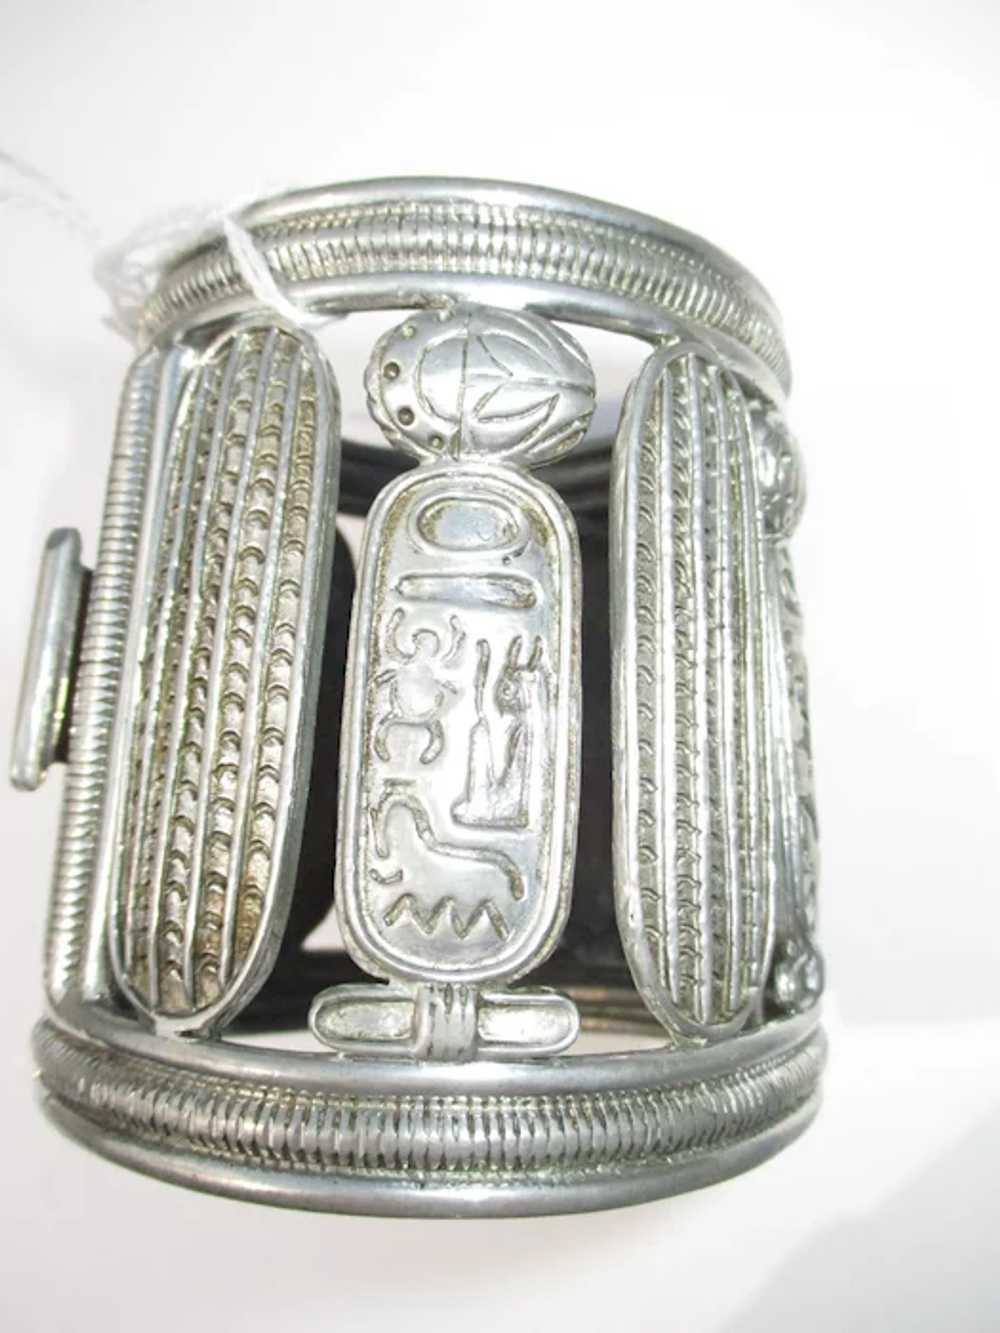 1940s Egyptian Revival Hinged Cuff - image 2